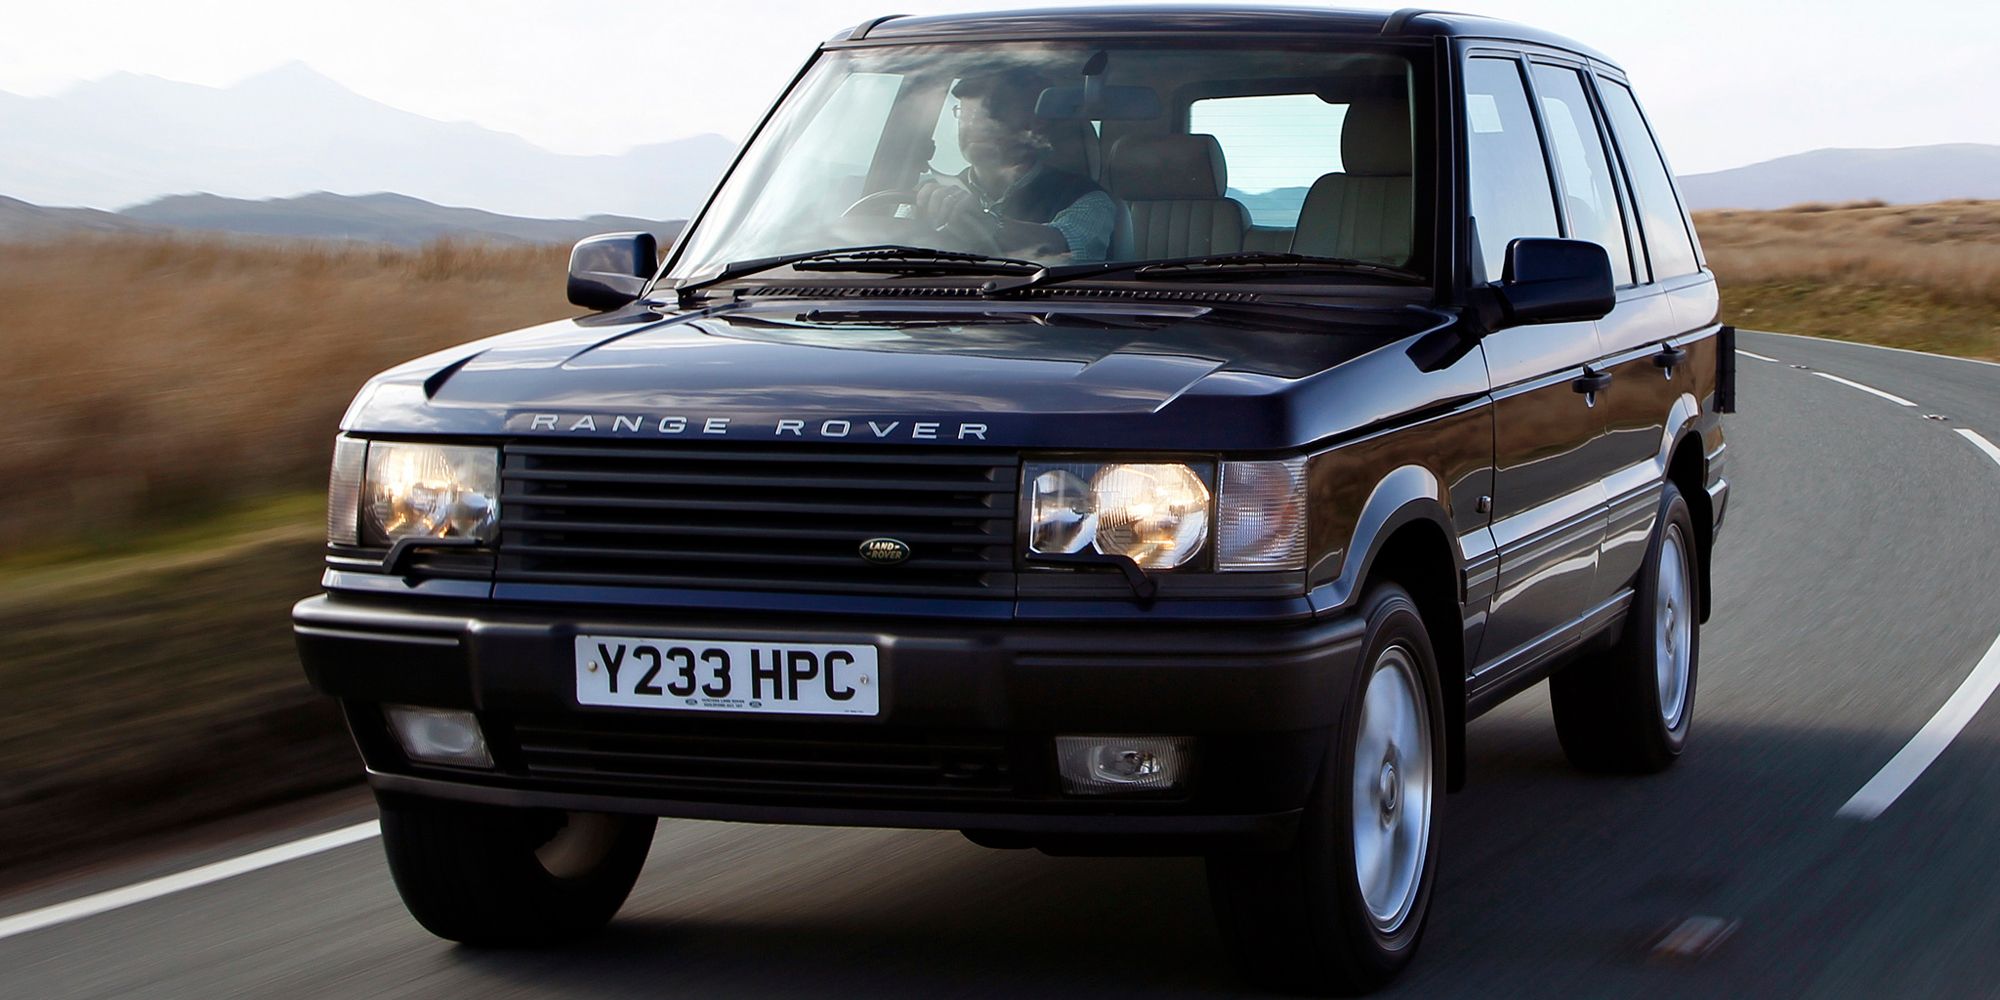 The front of the P38 Range Rover